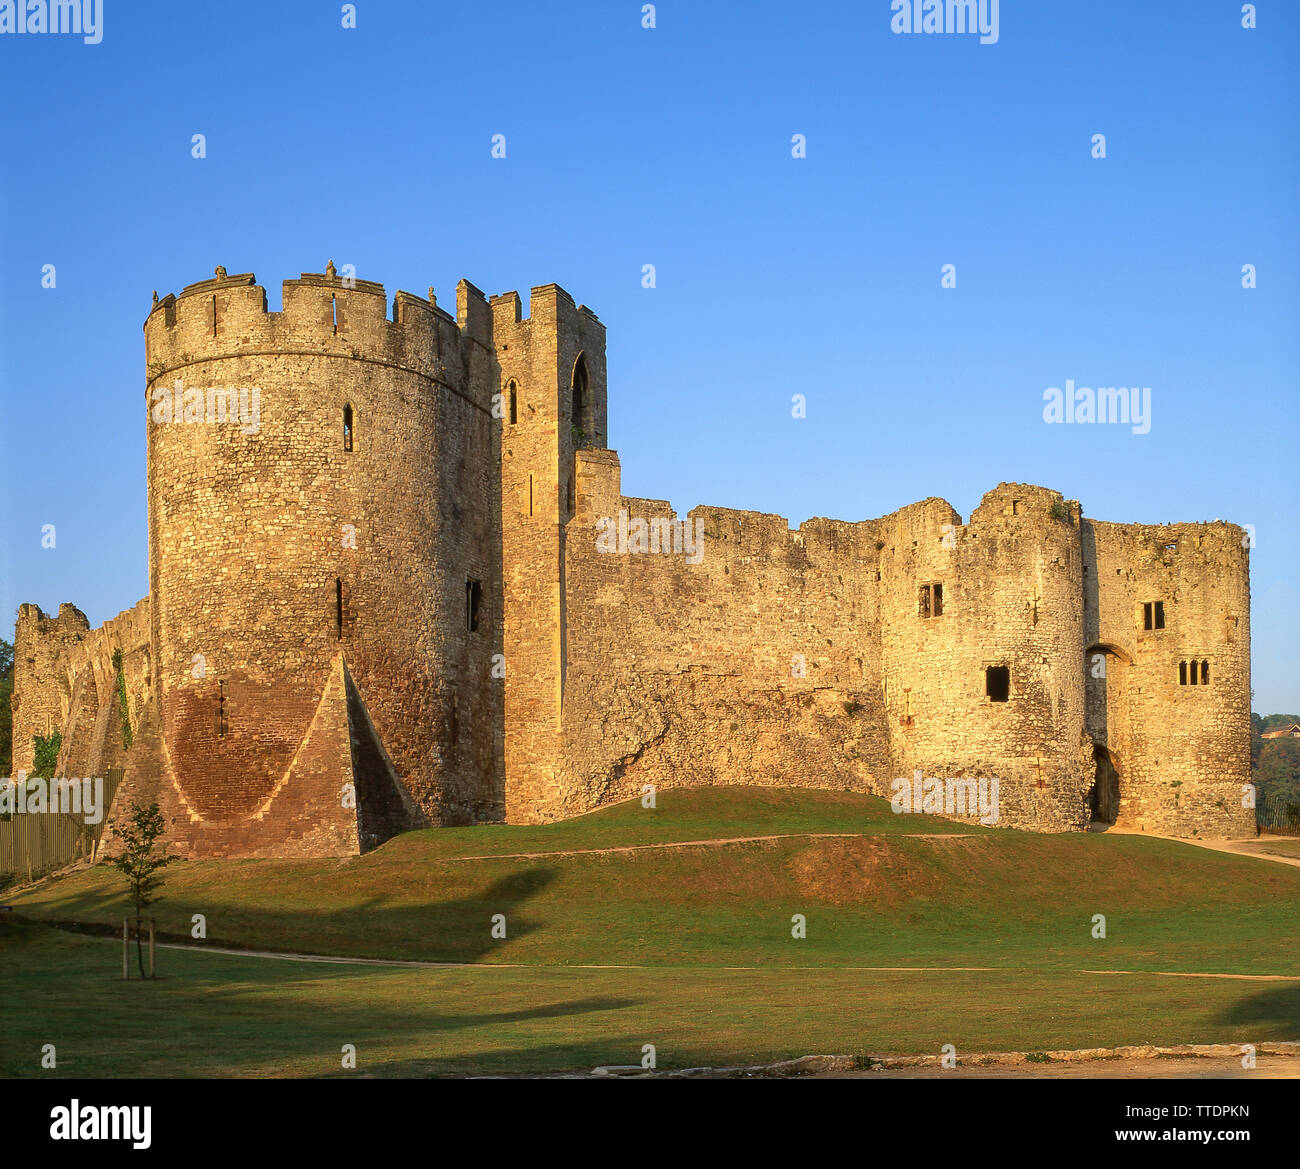 Chepstow Castle, showing Marten's Tower and gatehouse, Chepstow, Monmouthshire, Wales, United Kingdom Stock Photo